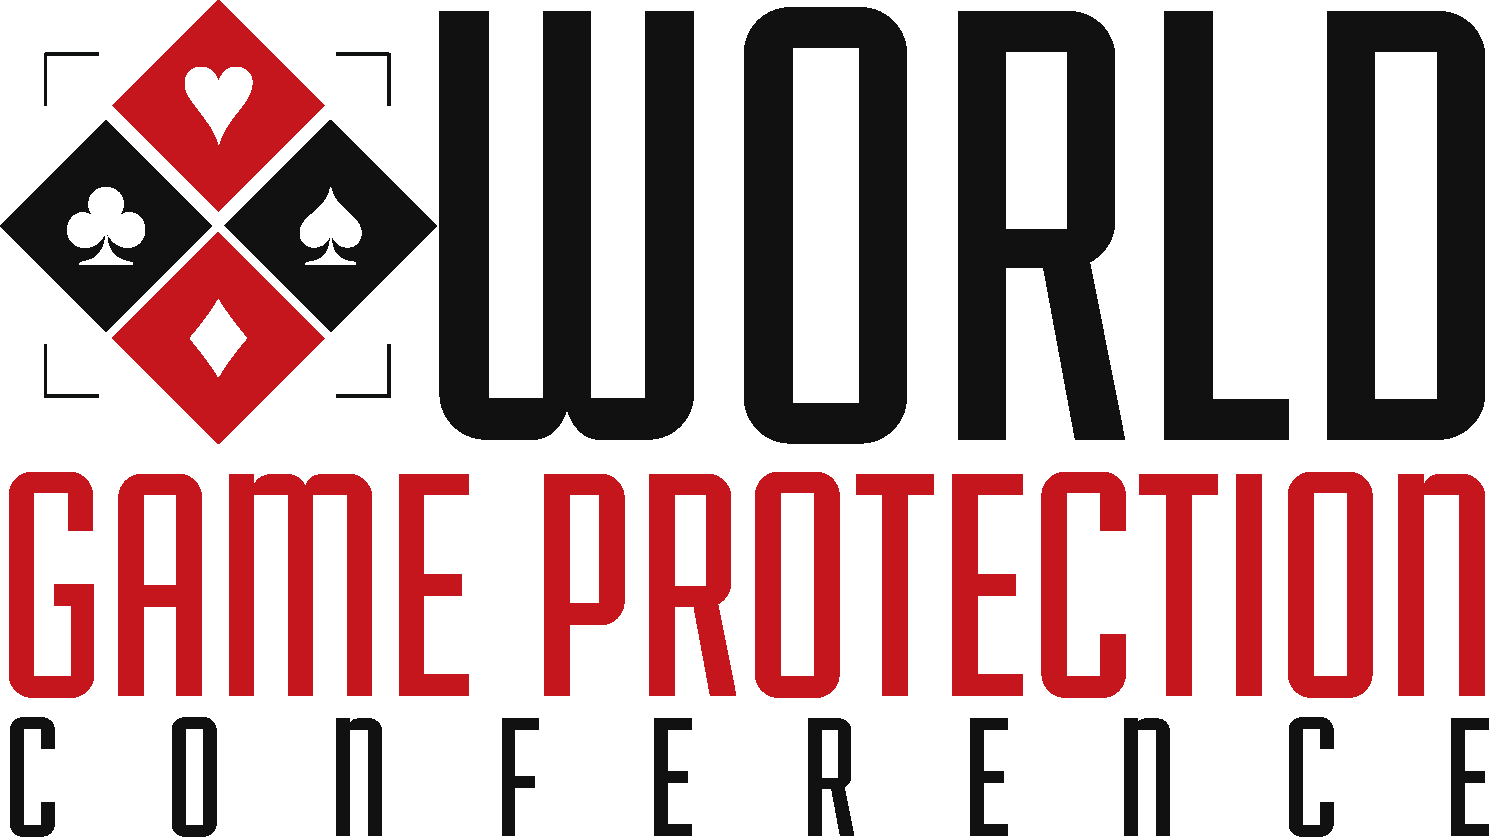 World Game Protection